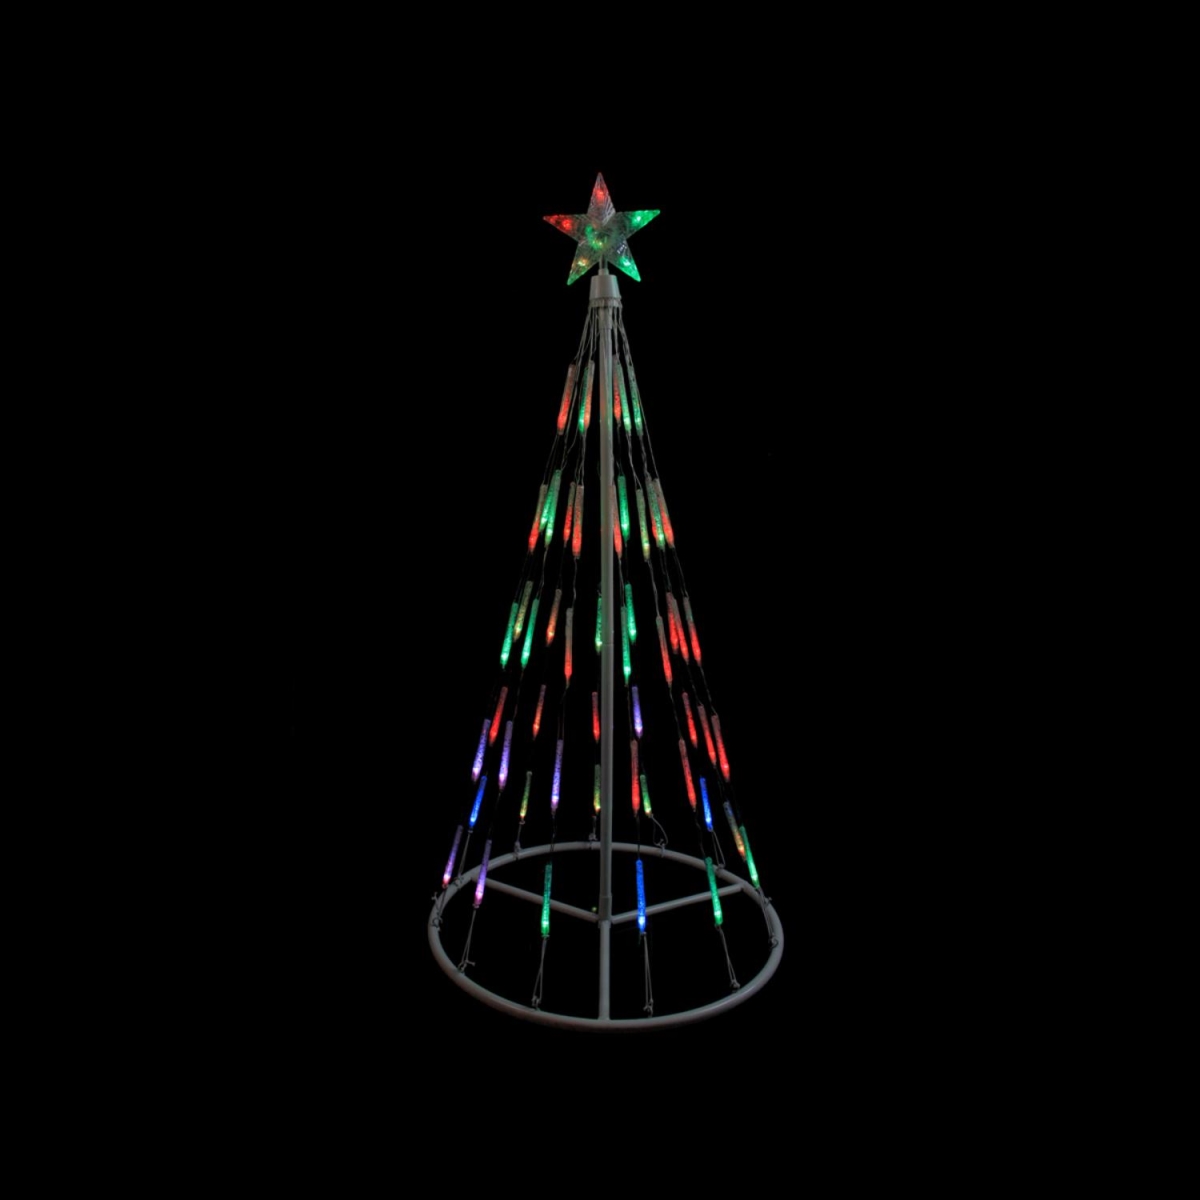 31736741 4 Ft. White Single Tier Bubble Cone Christmas Tree Lighted Yard Art Decoration - Multi Lights